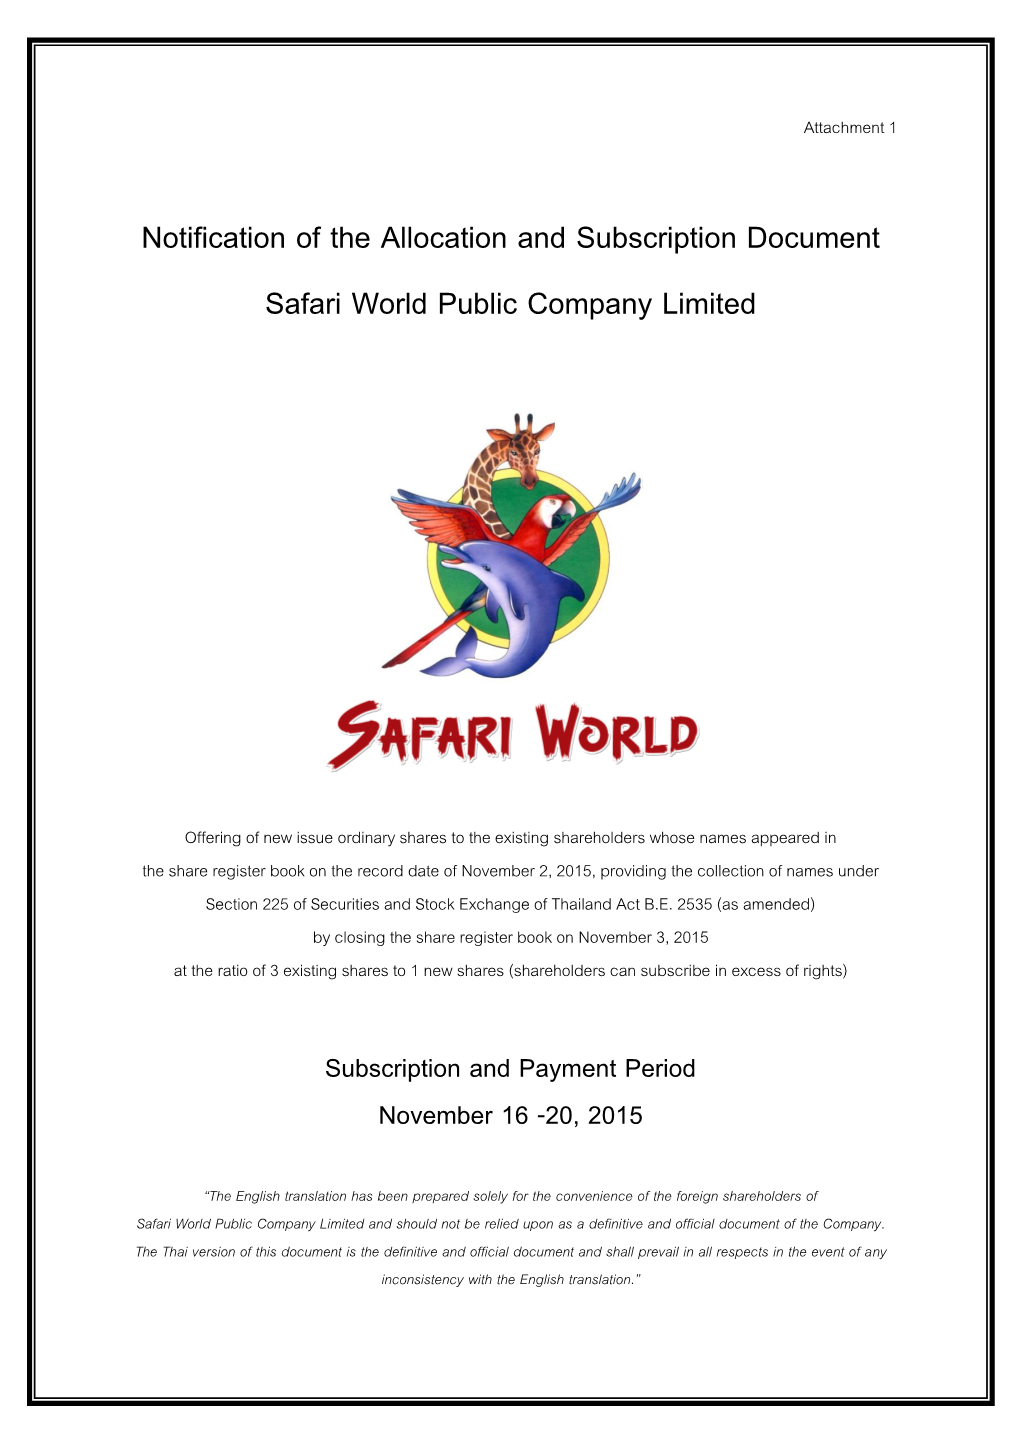 Notification of the Allocation and Subscription Document Safari World Public Company Limited